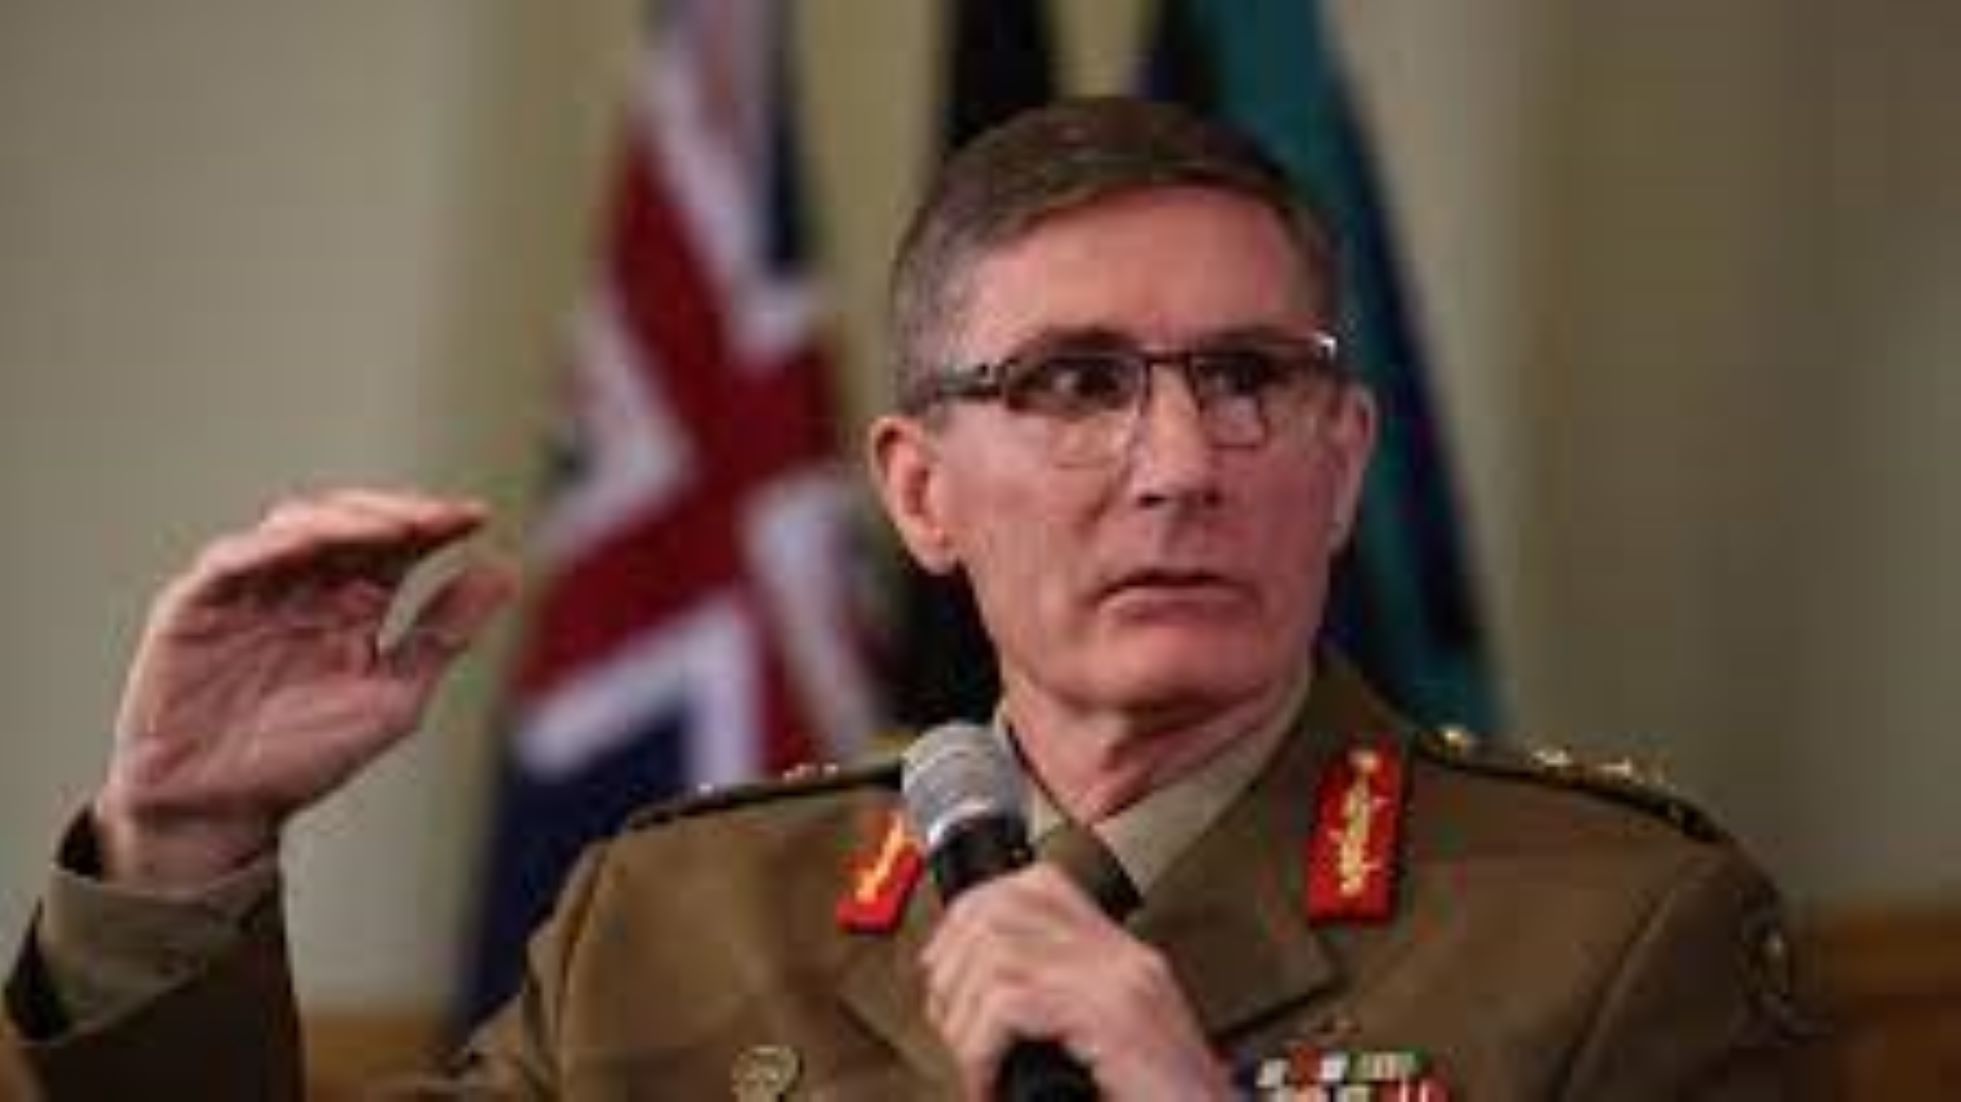 Australian Defence Chief Warns Of “Uncomfortable Days” In Afghan War Crimes Investigation